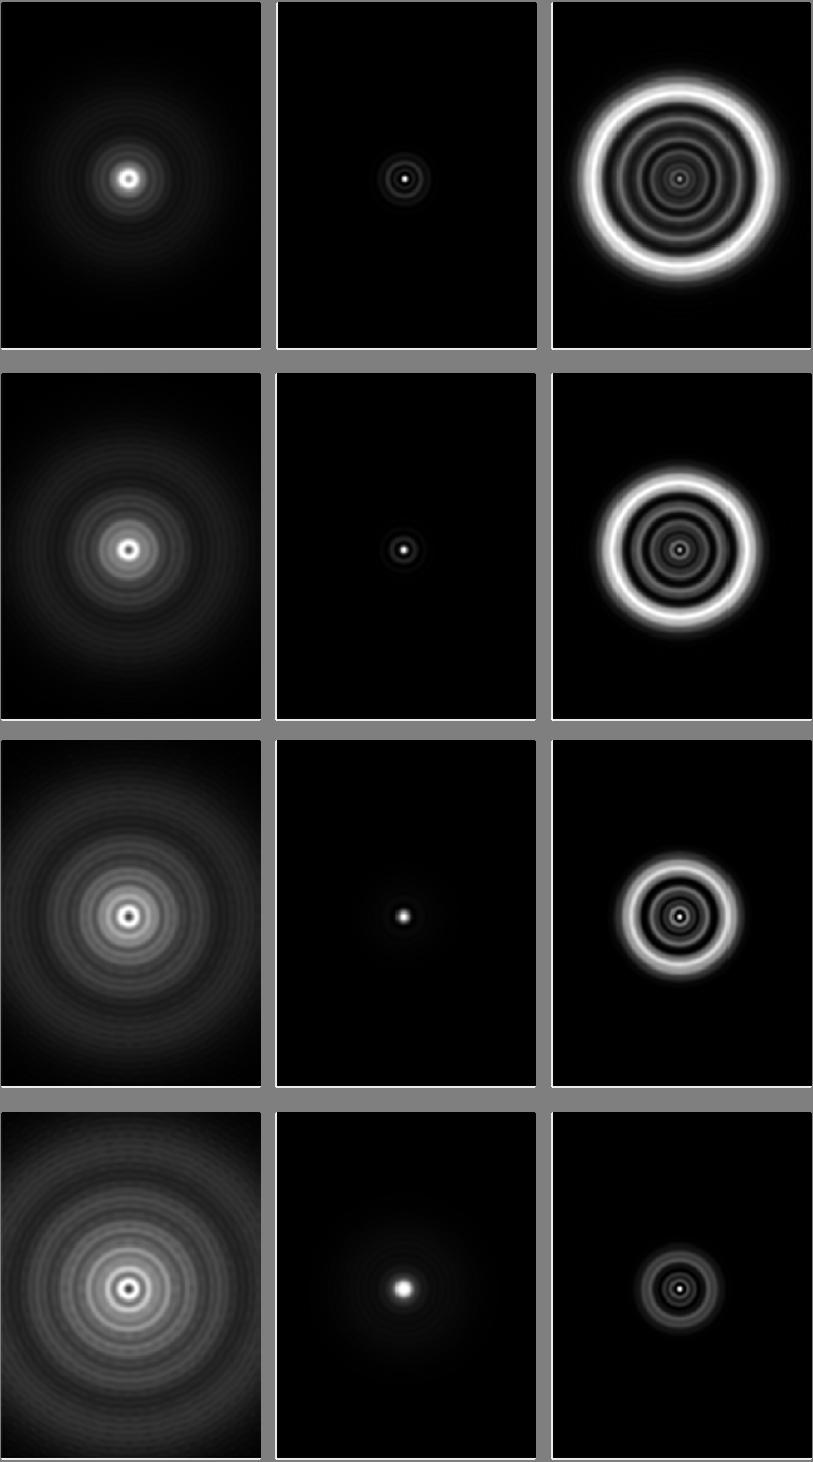 Diffraction images Two